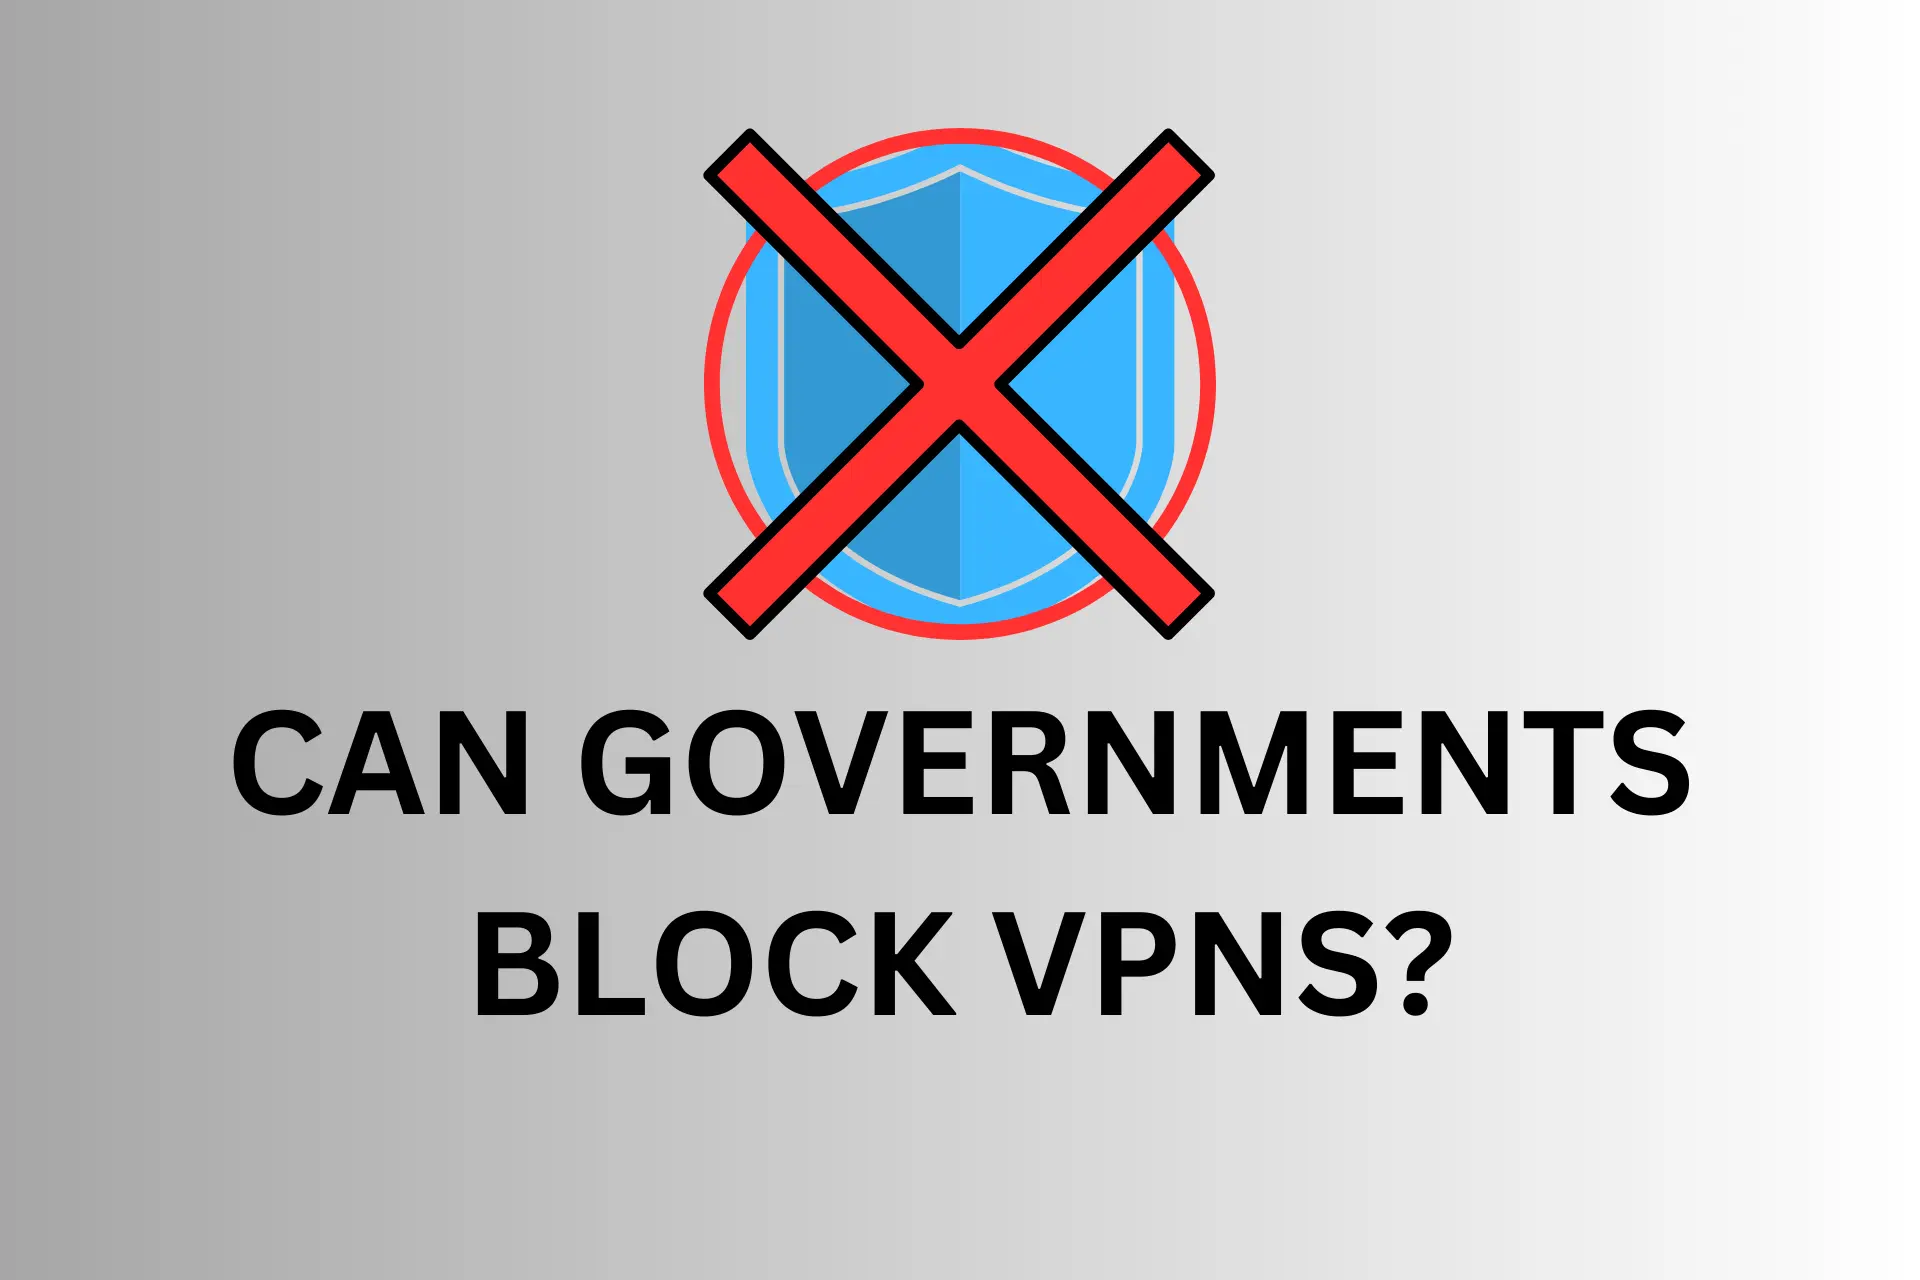 CAN GOVERNMENT BLOCK VPN